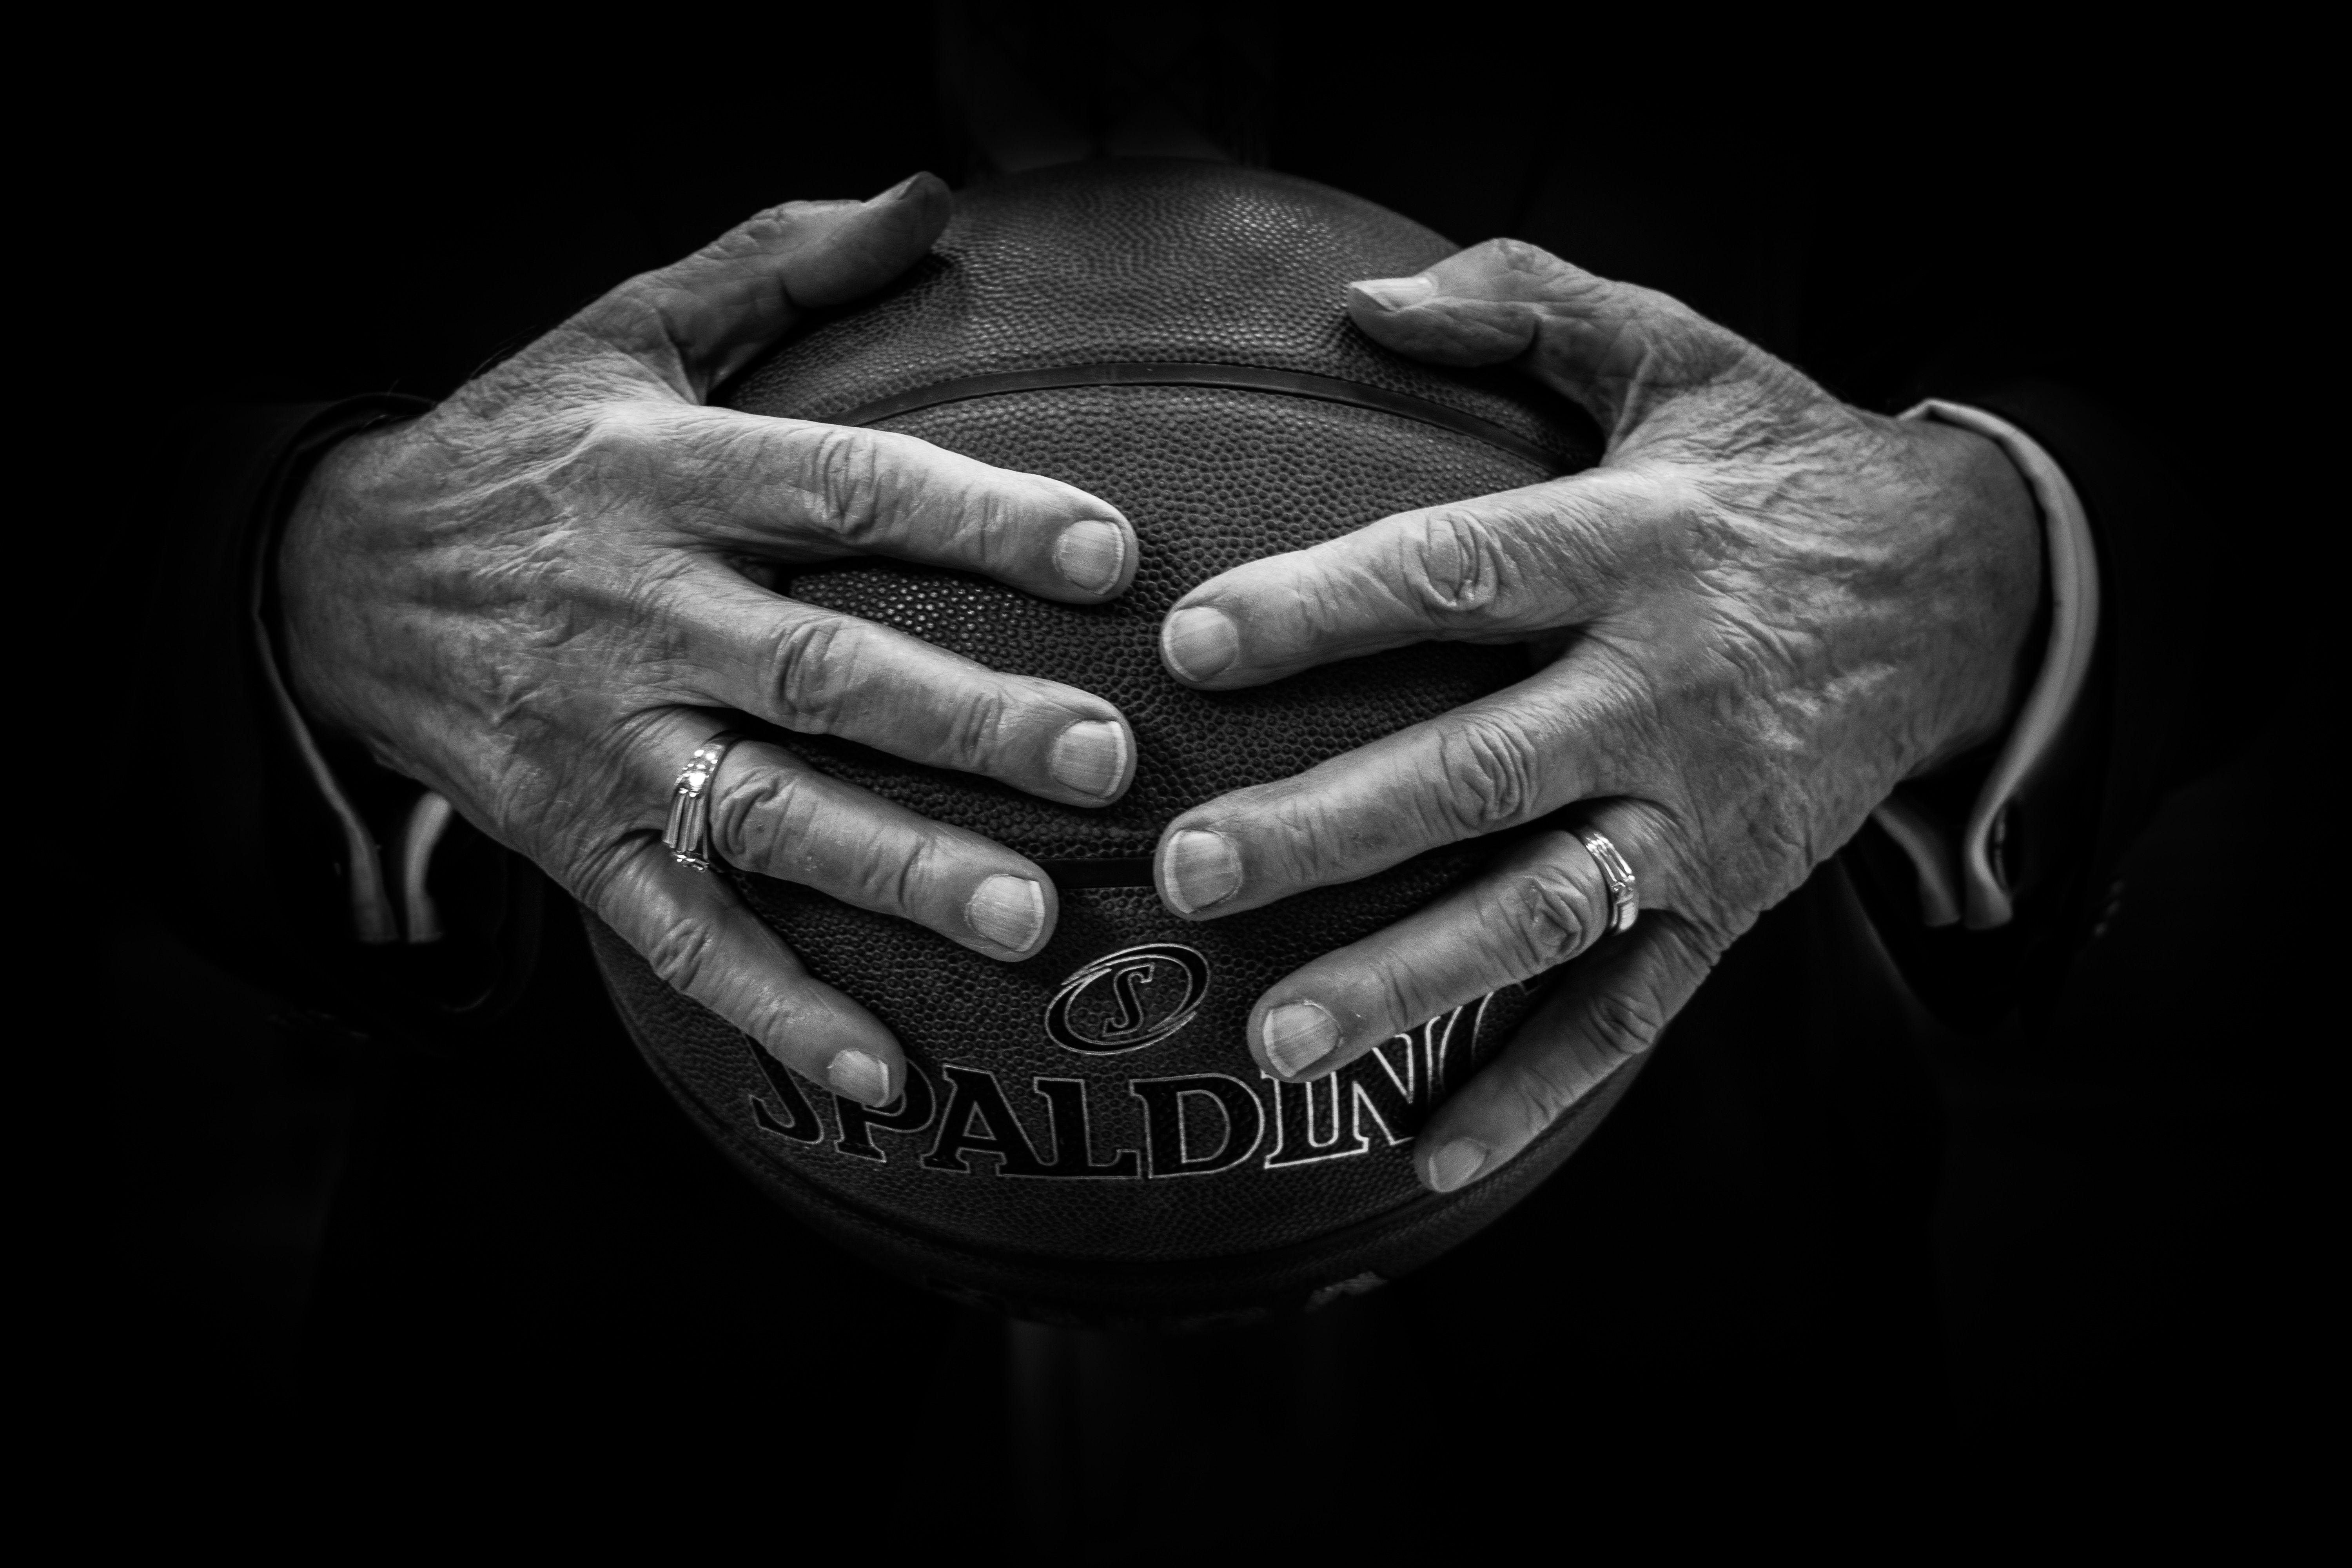 2 Hands -On Ball Logo - grey scale photo of two hands holding a spalding basketball free